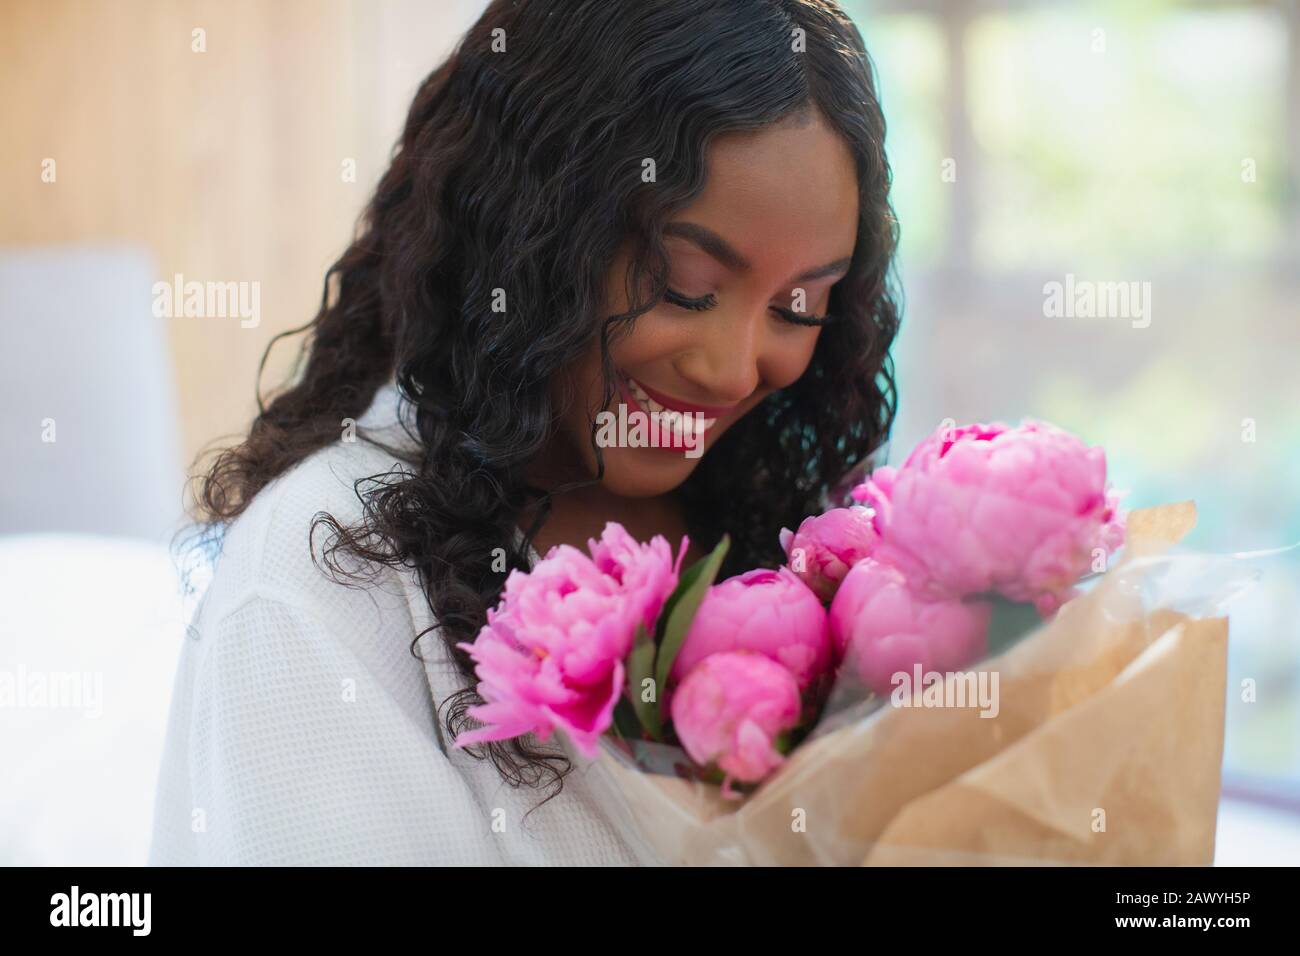 Happy young woman receiving pink peony bouquet Stock Photo